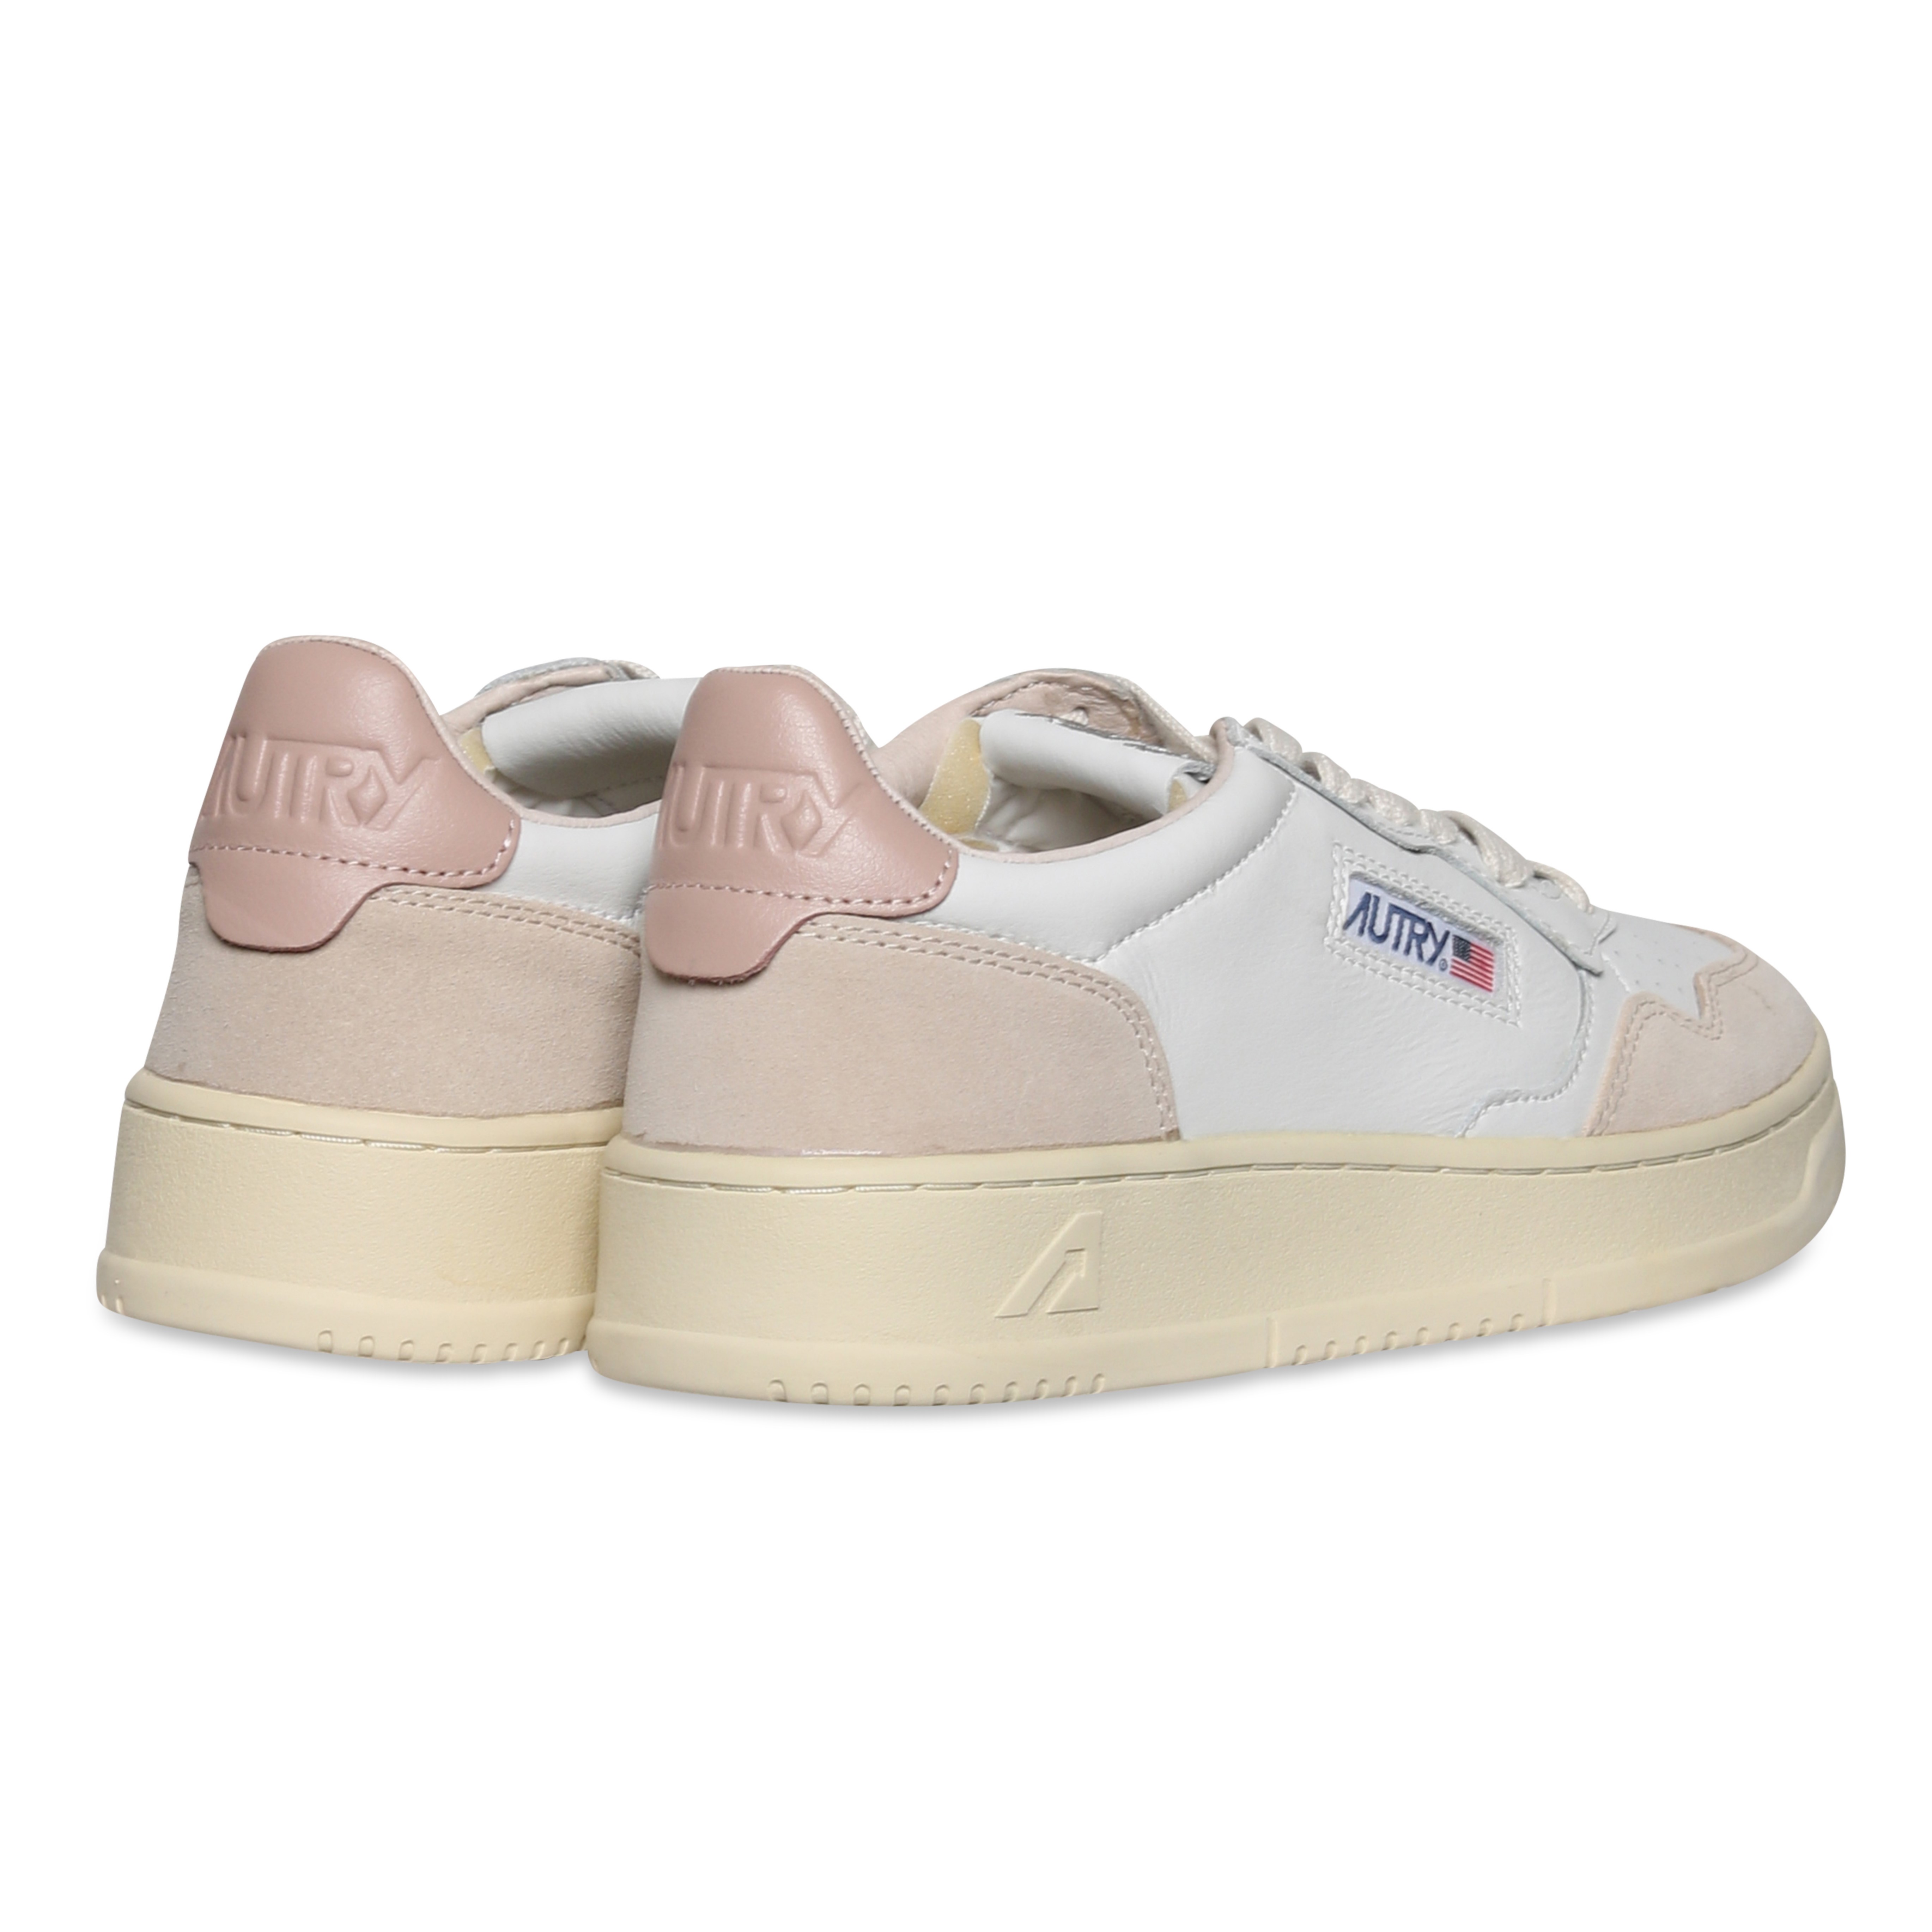 Autry Action Shoes Low Sneaker White/Suede/Pow 35